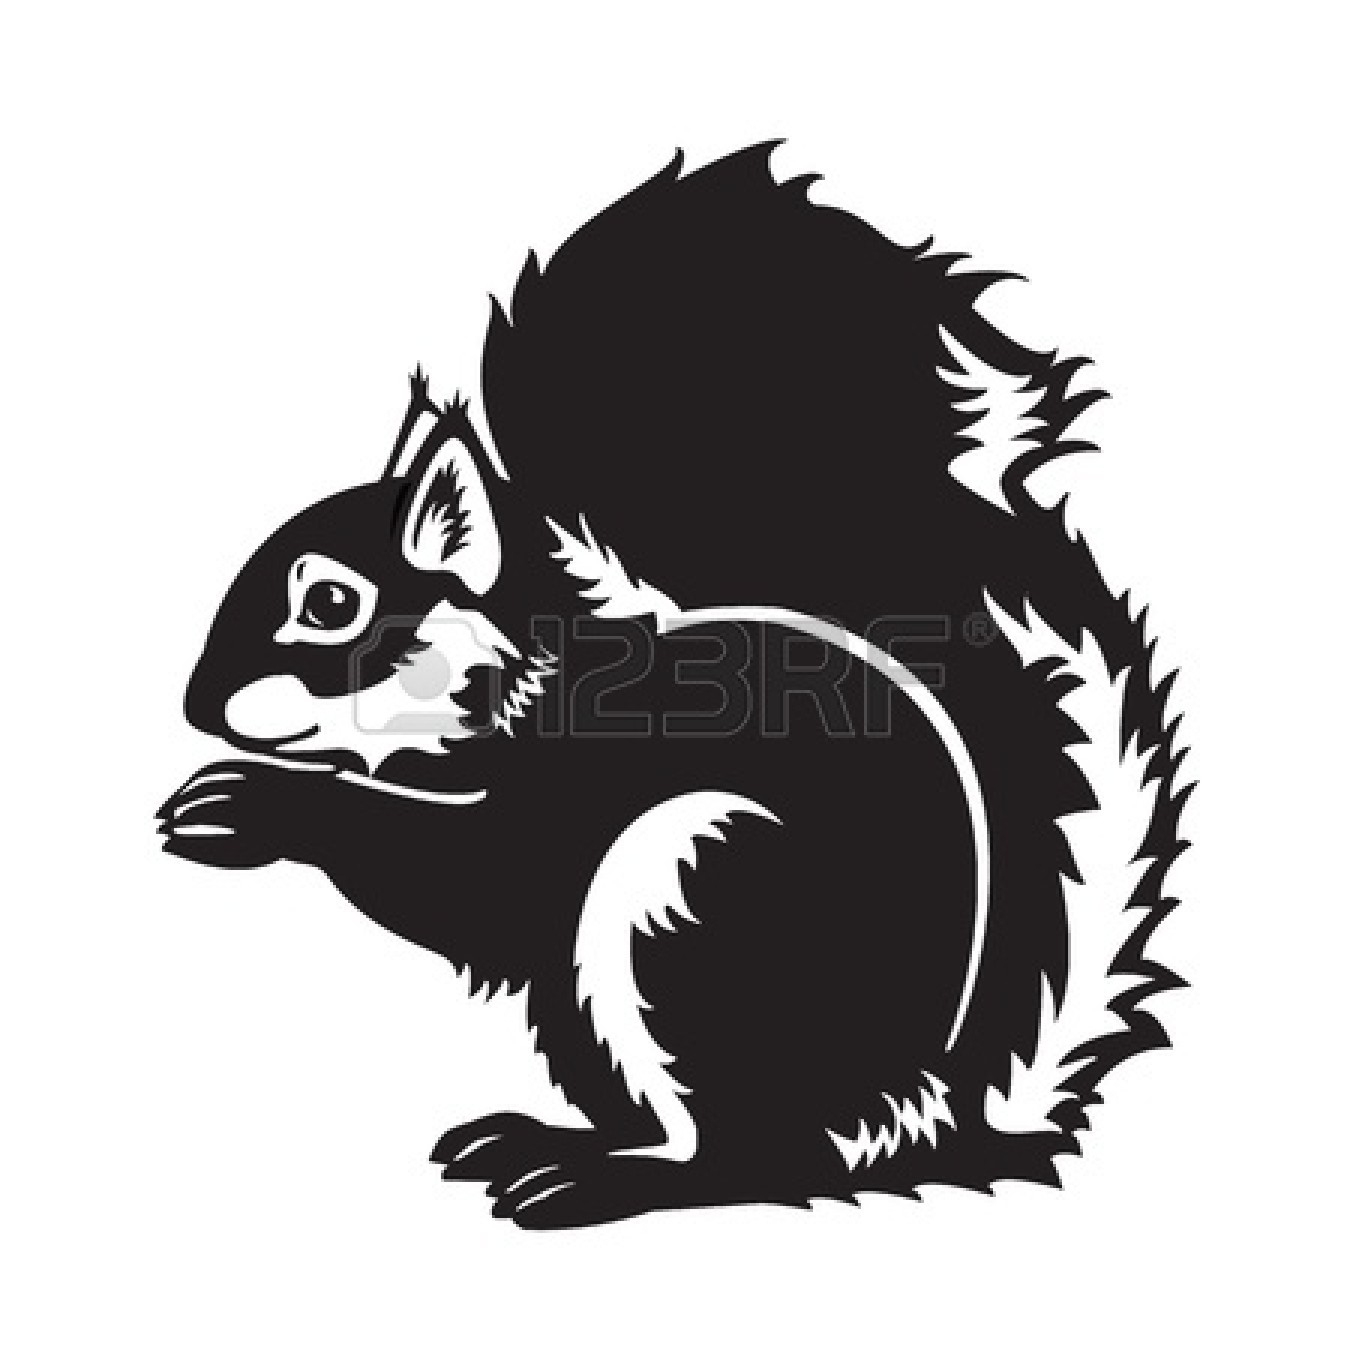 Squirrel Black And White   Clipart Panda   Free Clipart Images